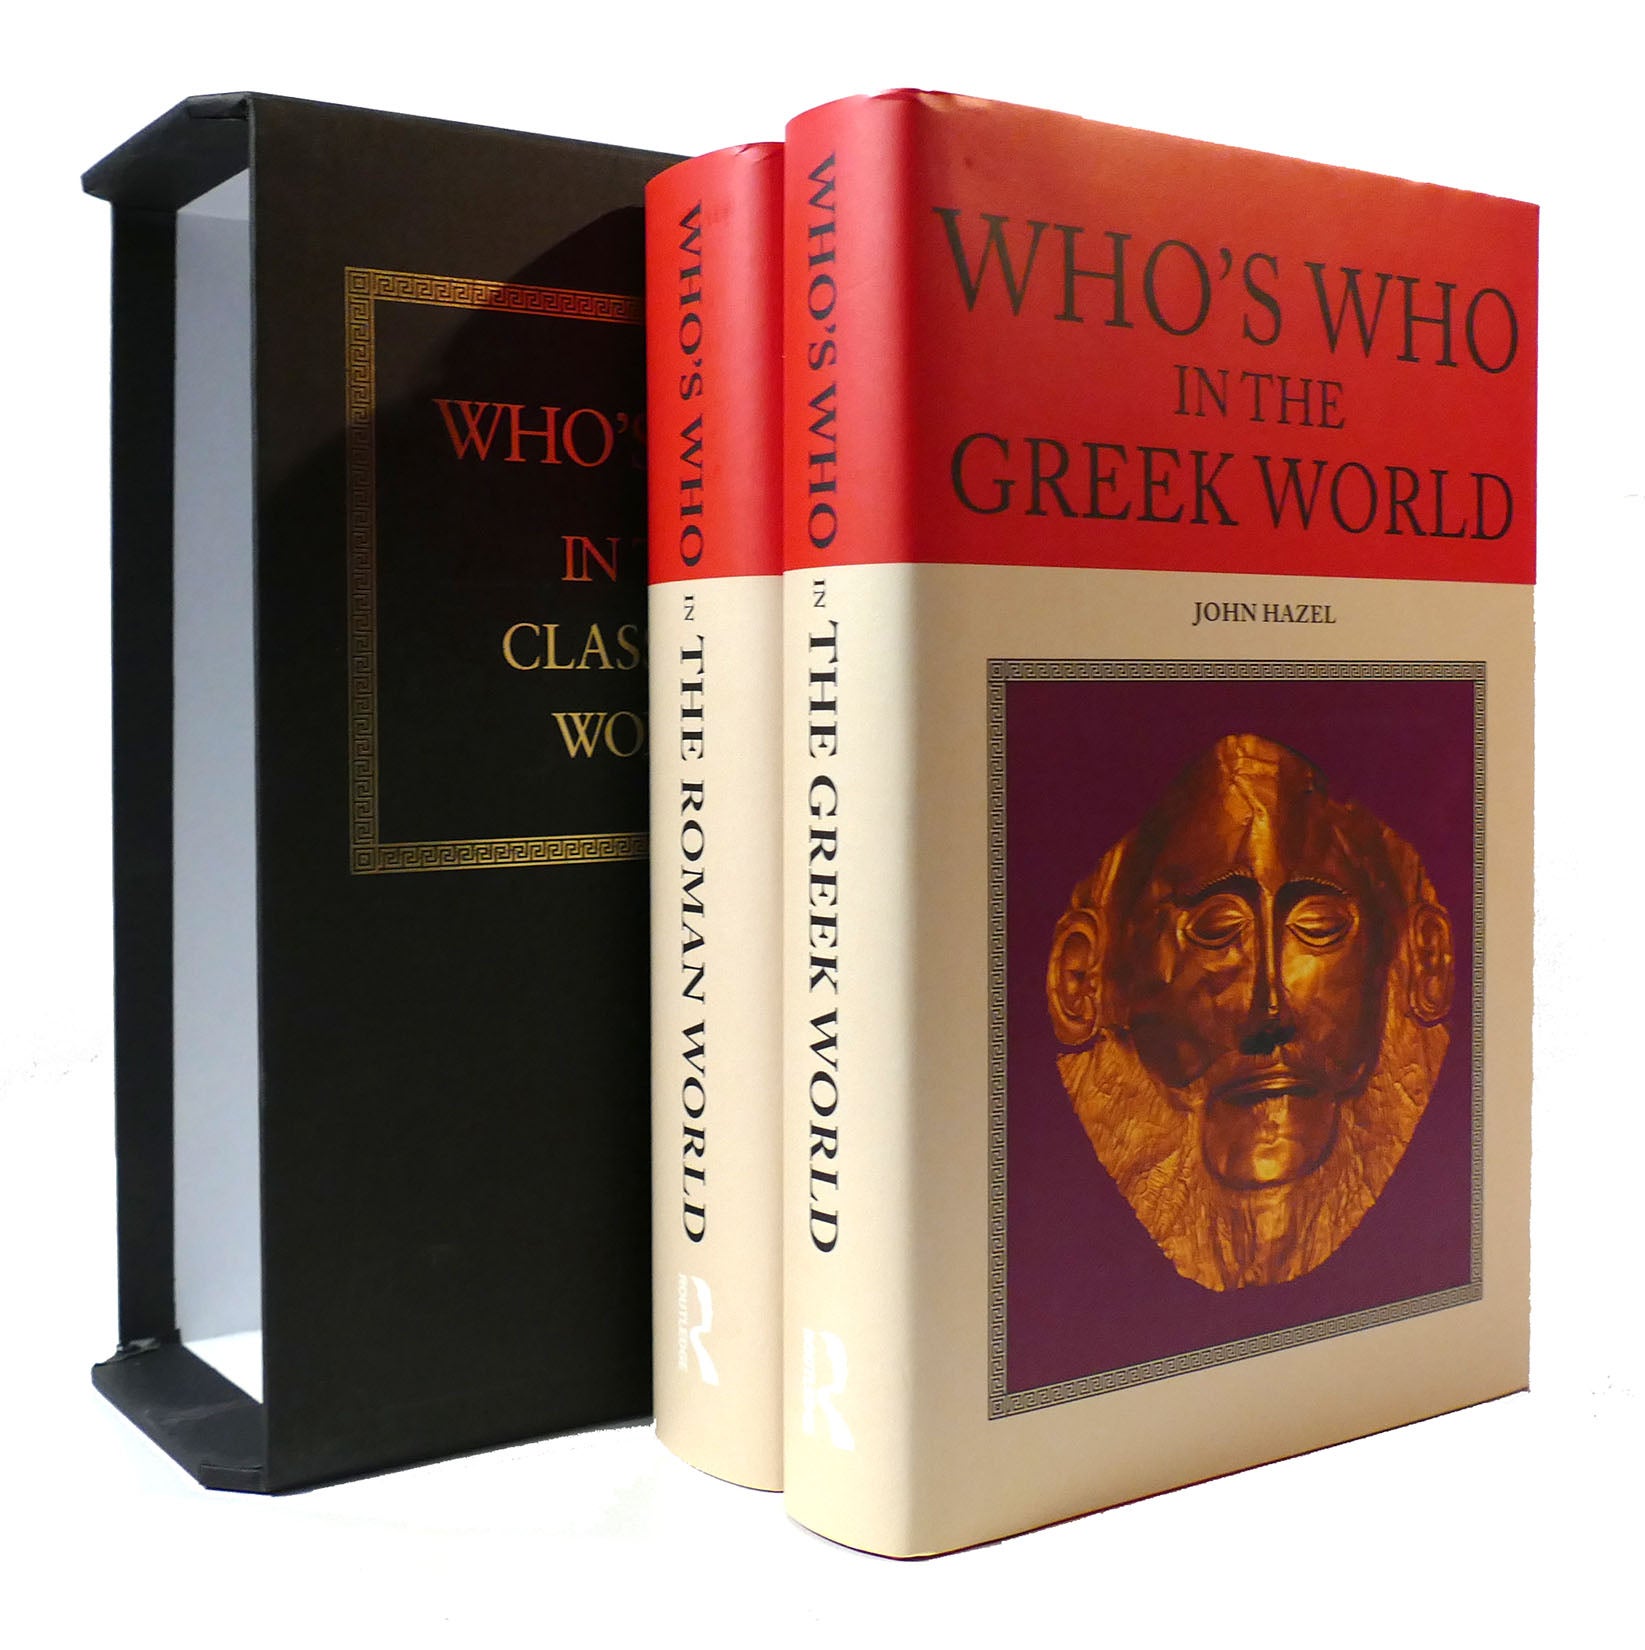 WHO'S WHO IN THE CLASSICAL WORLD TWO VOLUME SET Who's Who in the Greek  World and Who's Who in the Roman World by John Hazel on Rare Book Cellar